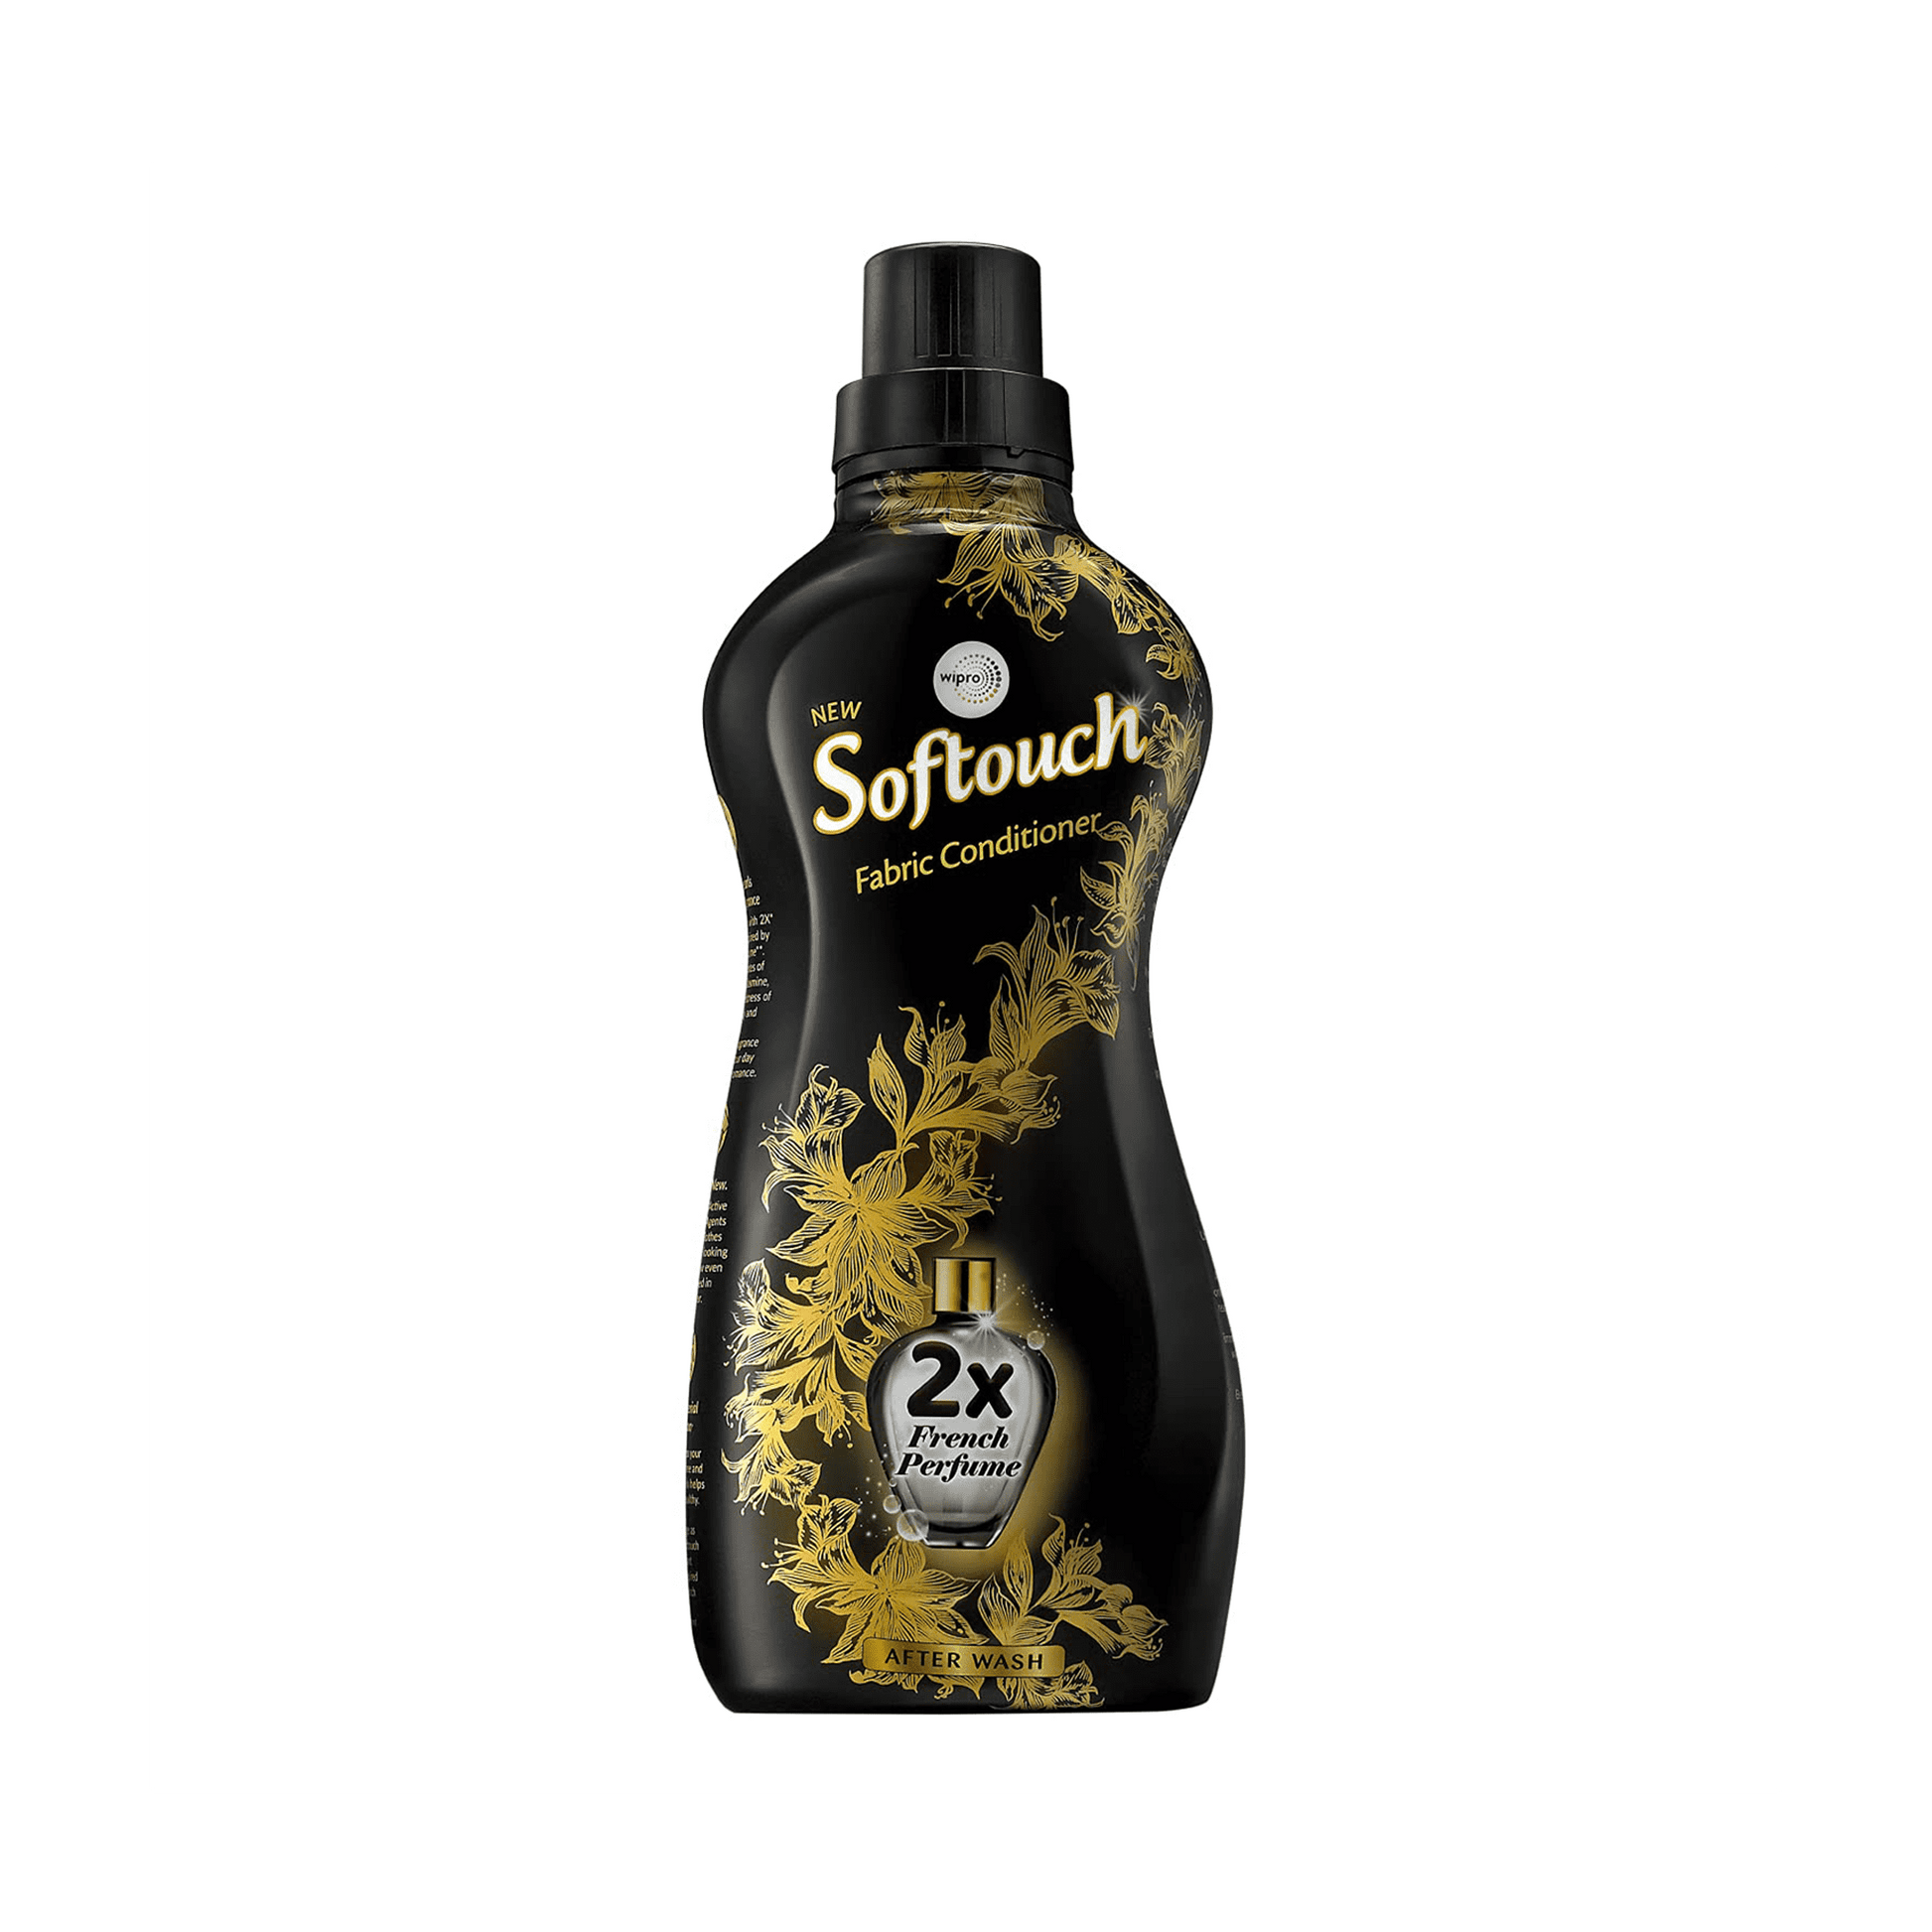 Soft Touch 2x French Perfume Fabric Conditioner.